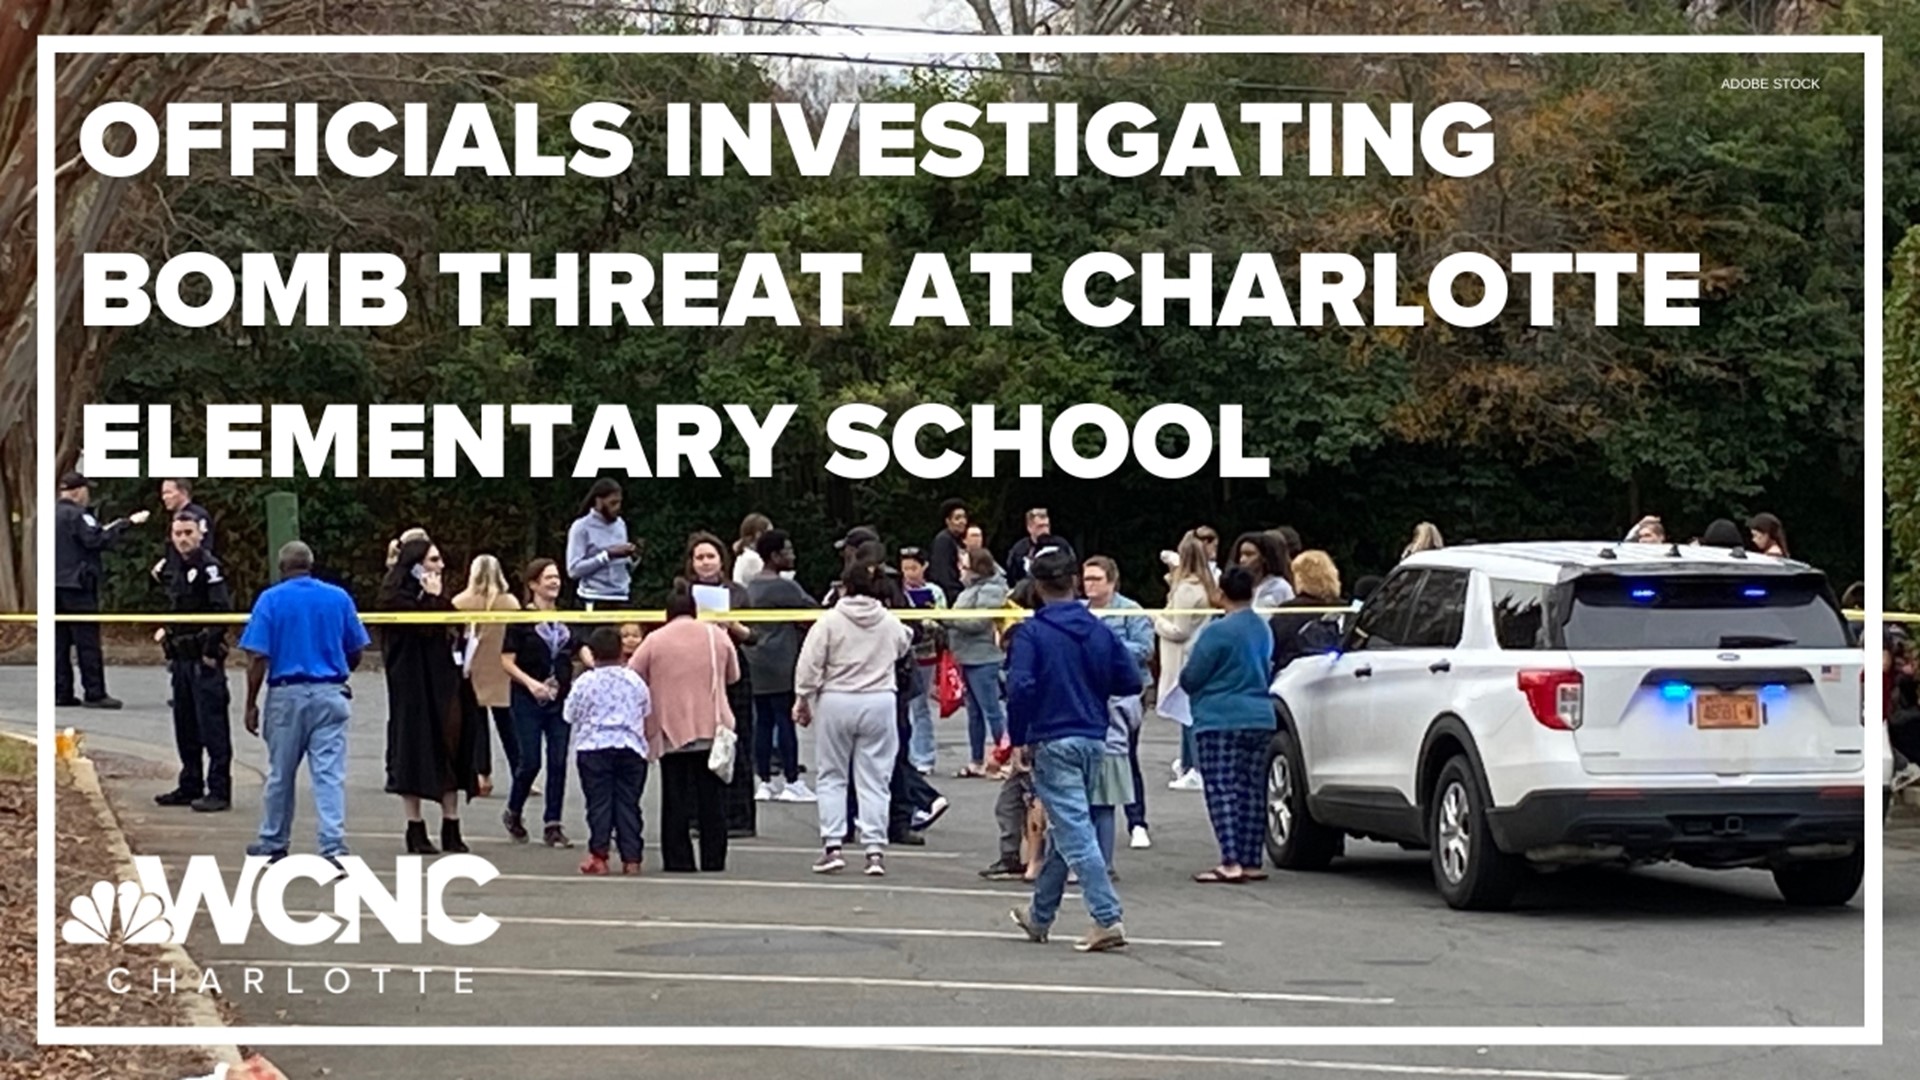 Pinewood Elementary School in south Charlotte was evacuated after a bomb threat, school district officials said.